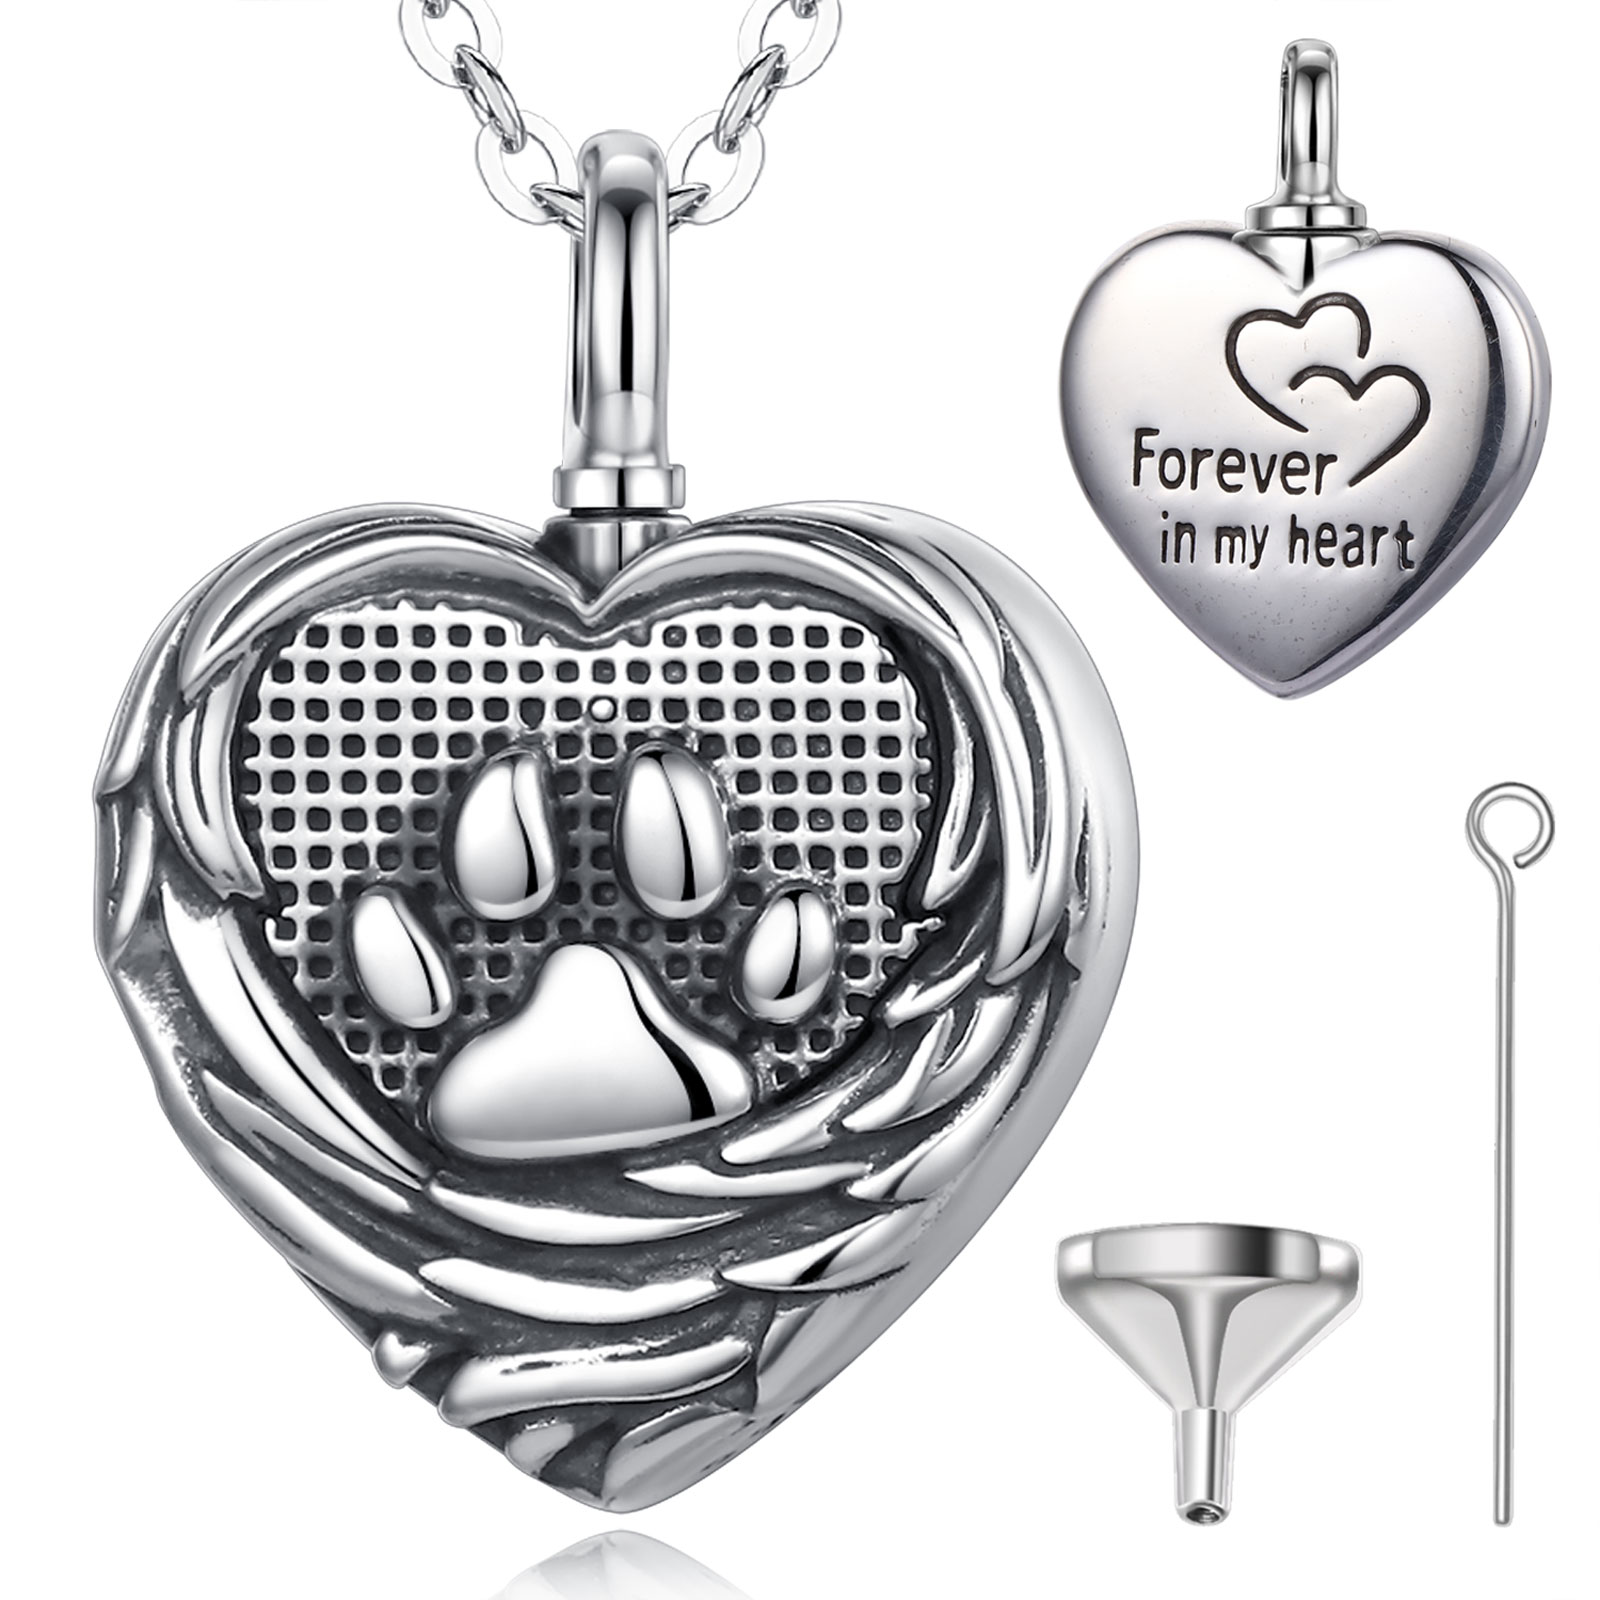 Merryshine cremation jewelry s925 sterling silver heart pendant paw ashes urn necklace for pet dog